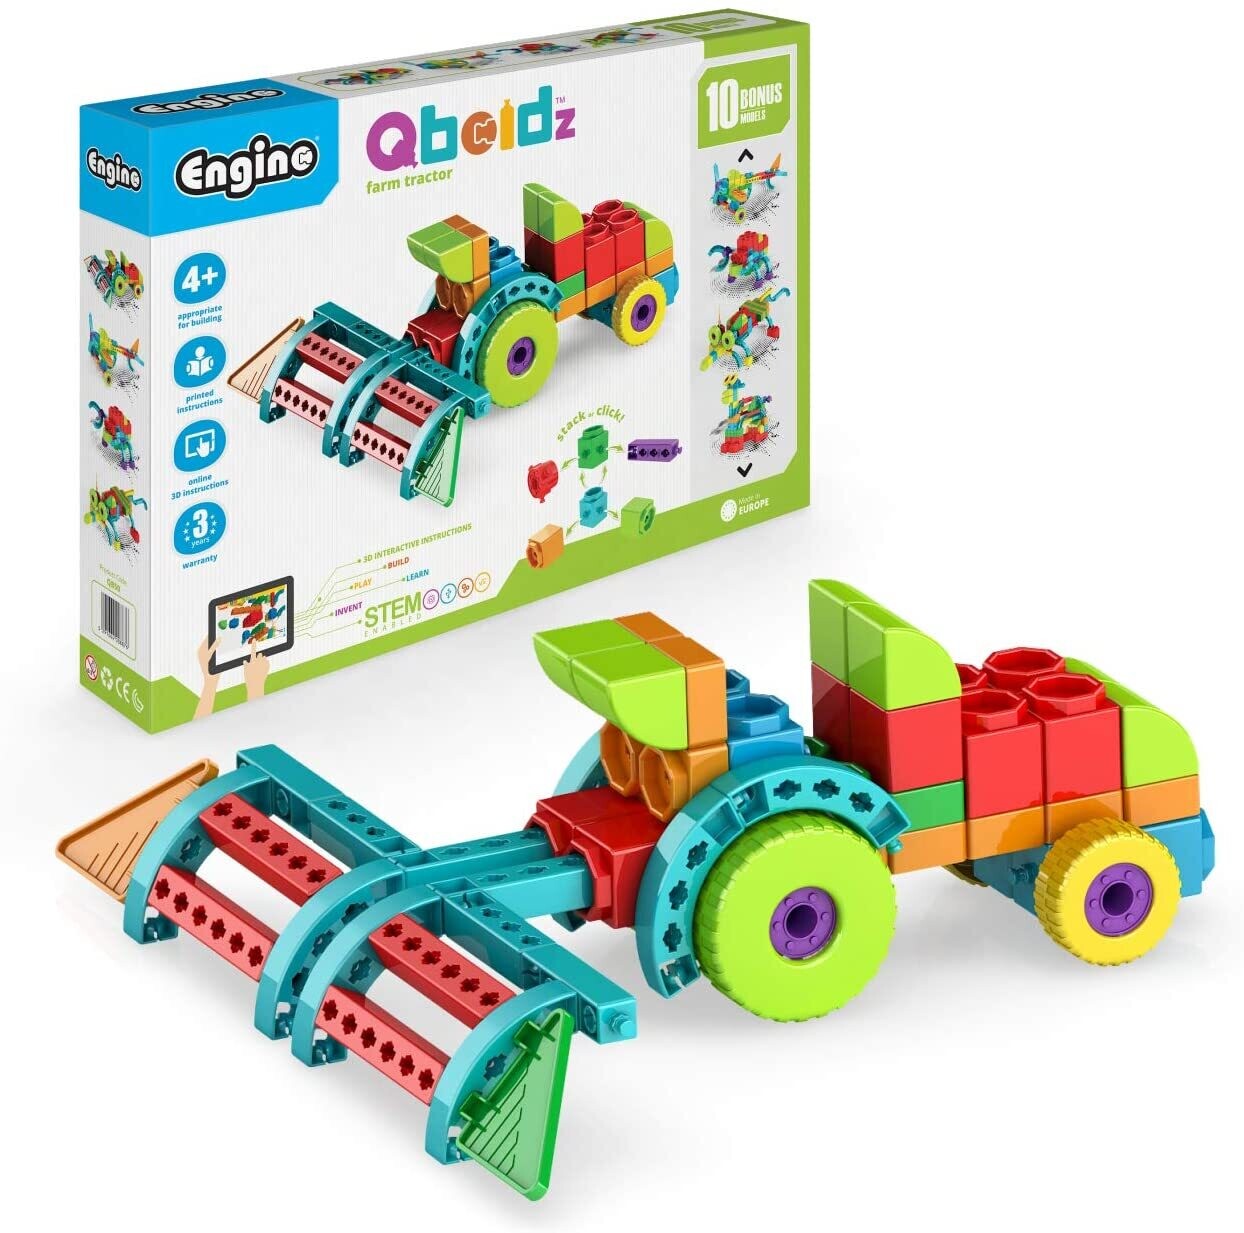 Engino Qboidz Tractor building Set for ages 3 to 7